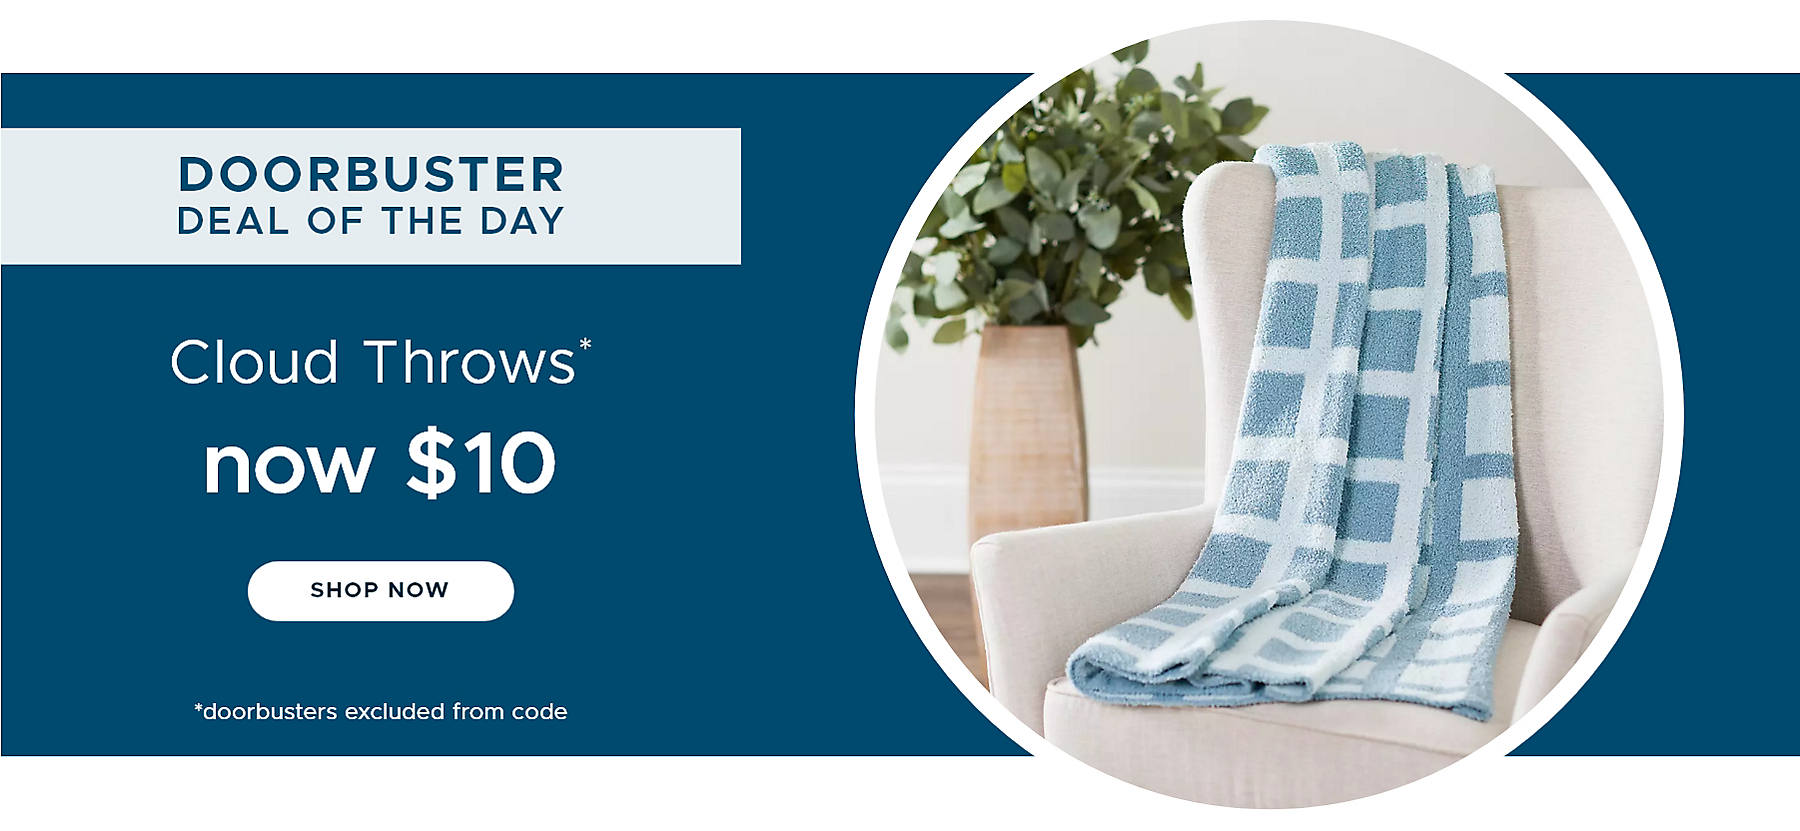 Doorbuster Deal of the Day Cloud Throws* now $10 shop now *doorbusters excluded from code